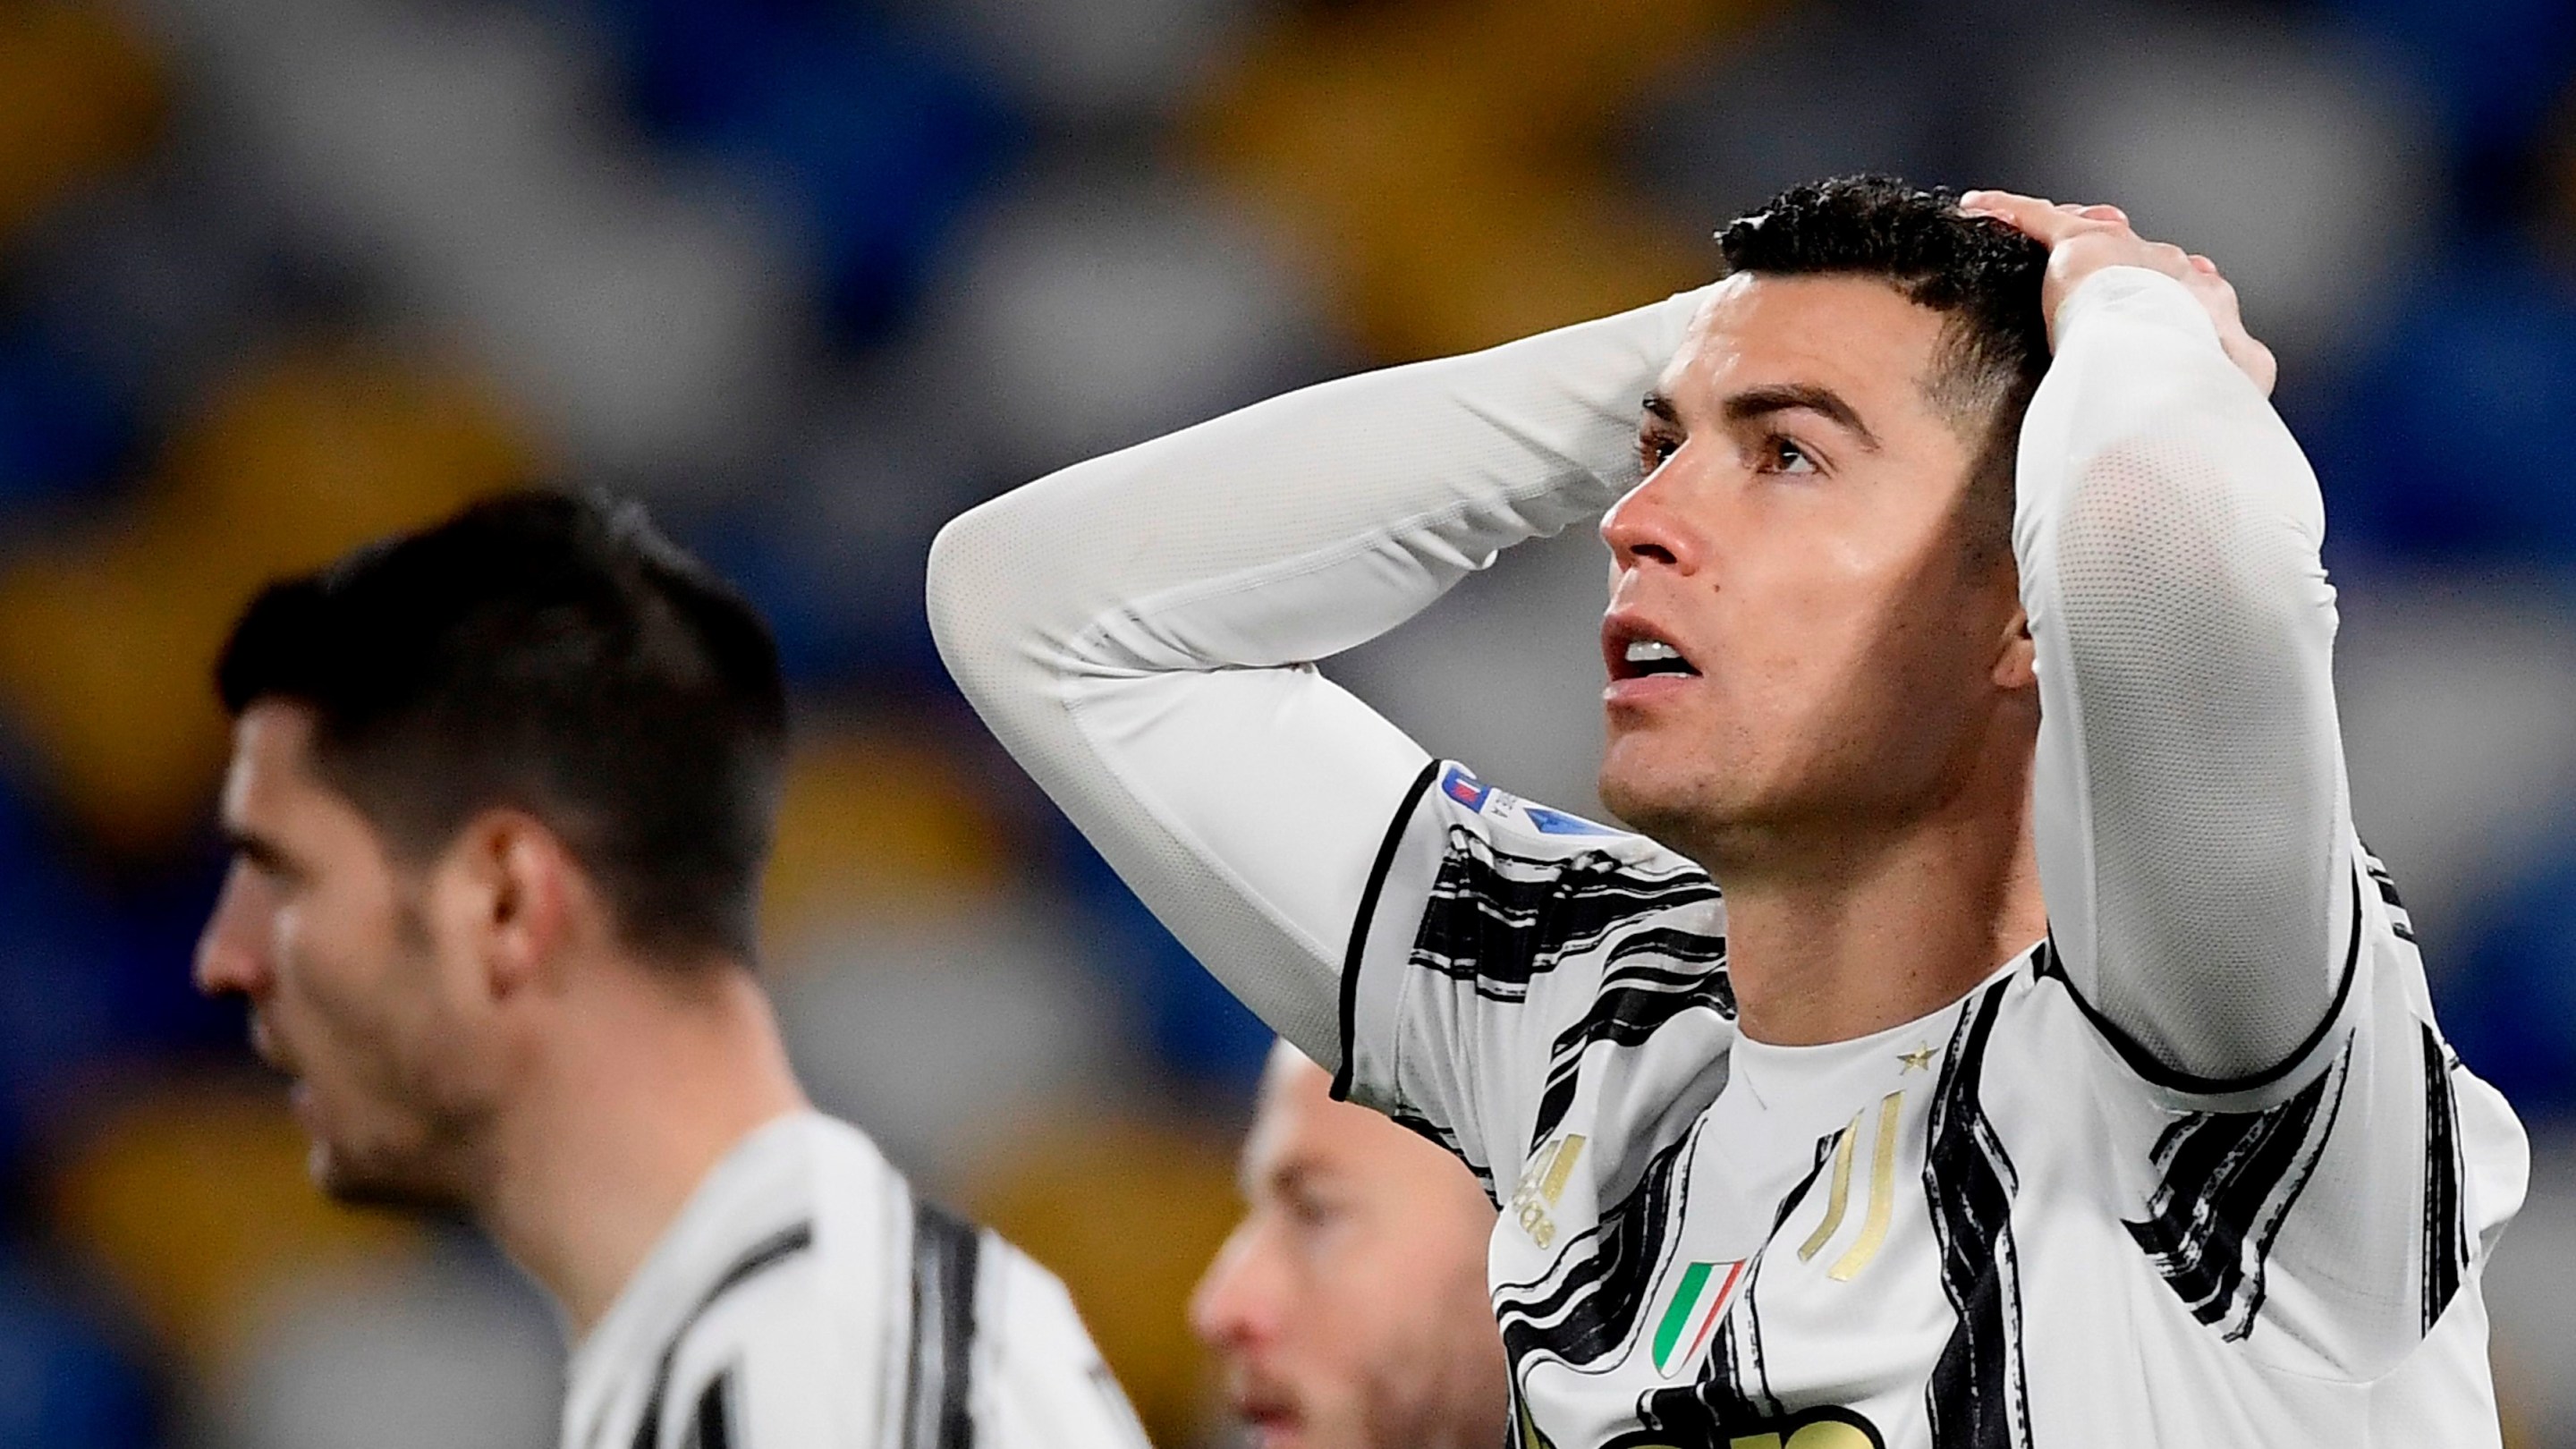 Juventus' Portuguese forward Cristiano Ronaldo reacts after missing a goal opportunity during the Italian Serie A football match Napoli vs Juventus on February 13, 2021 at the Diego Maradona (San Paolo) stadium in Naples.